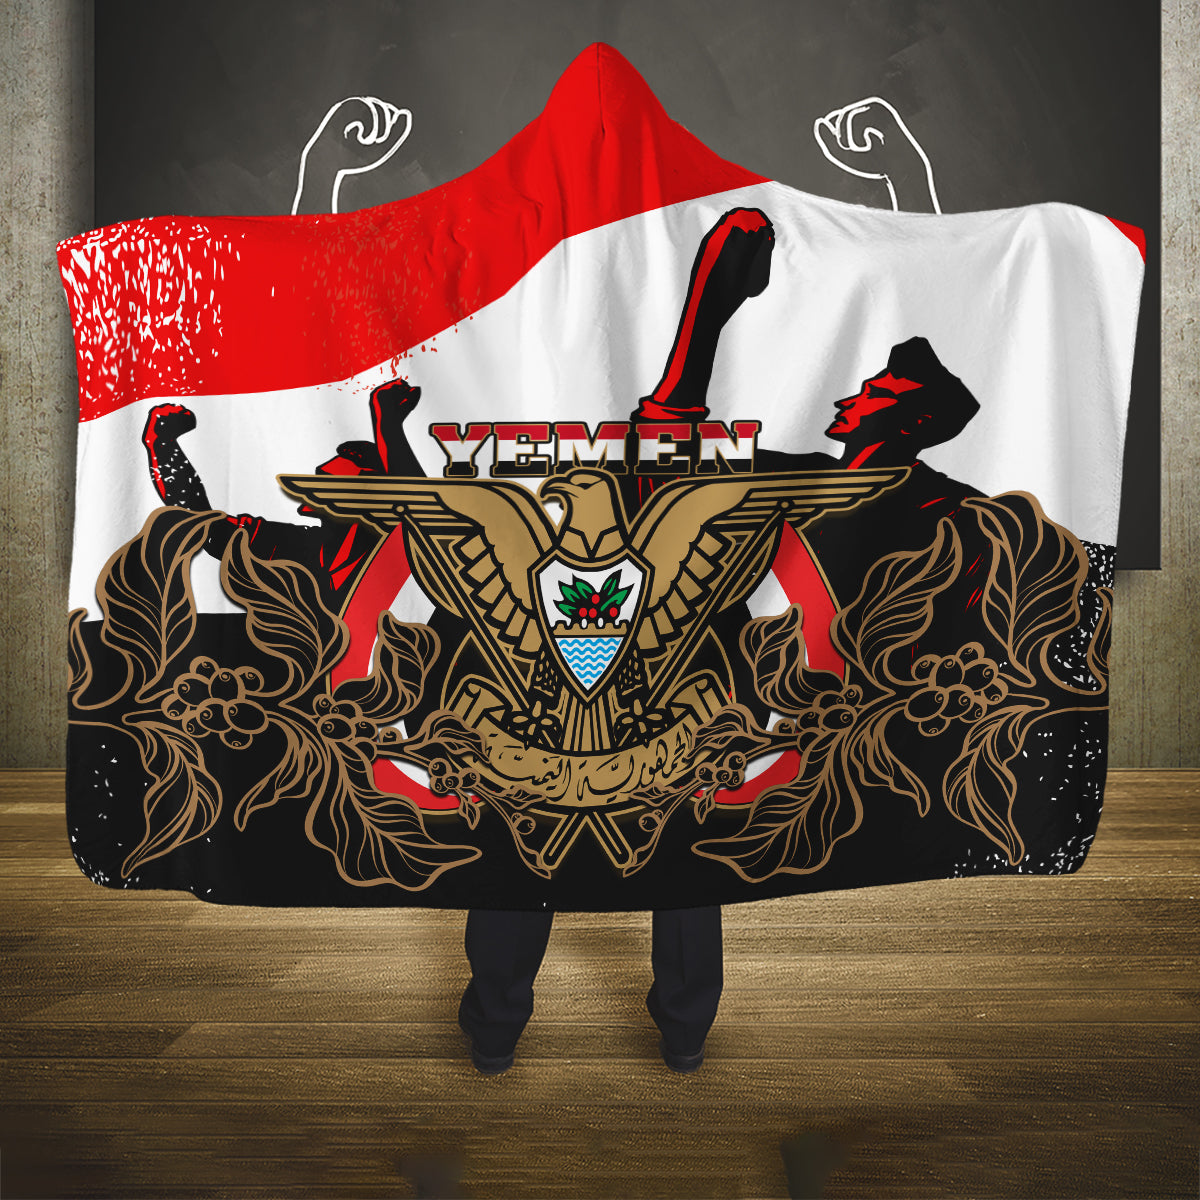 personalised-yemen-independence-day-hooded-blanket-yemeni-coat-of-arms-with-coffea-arabica-flowers